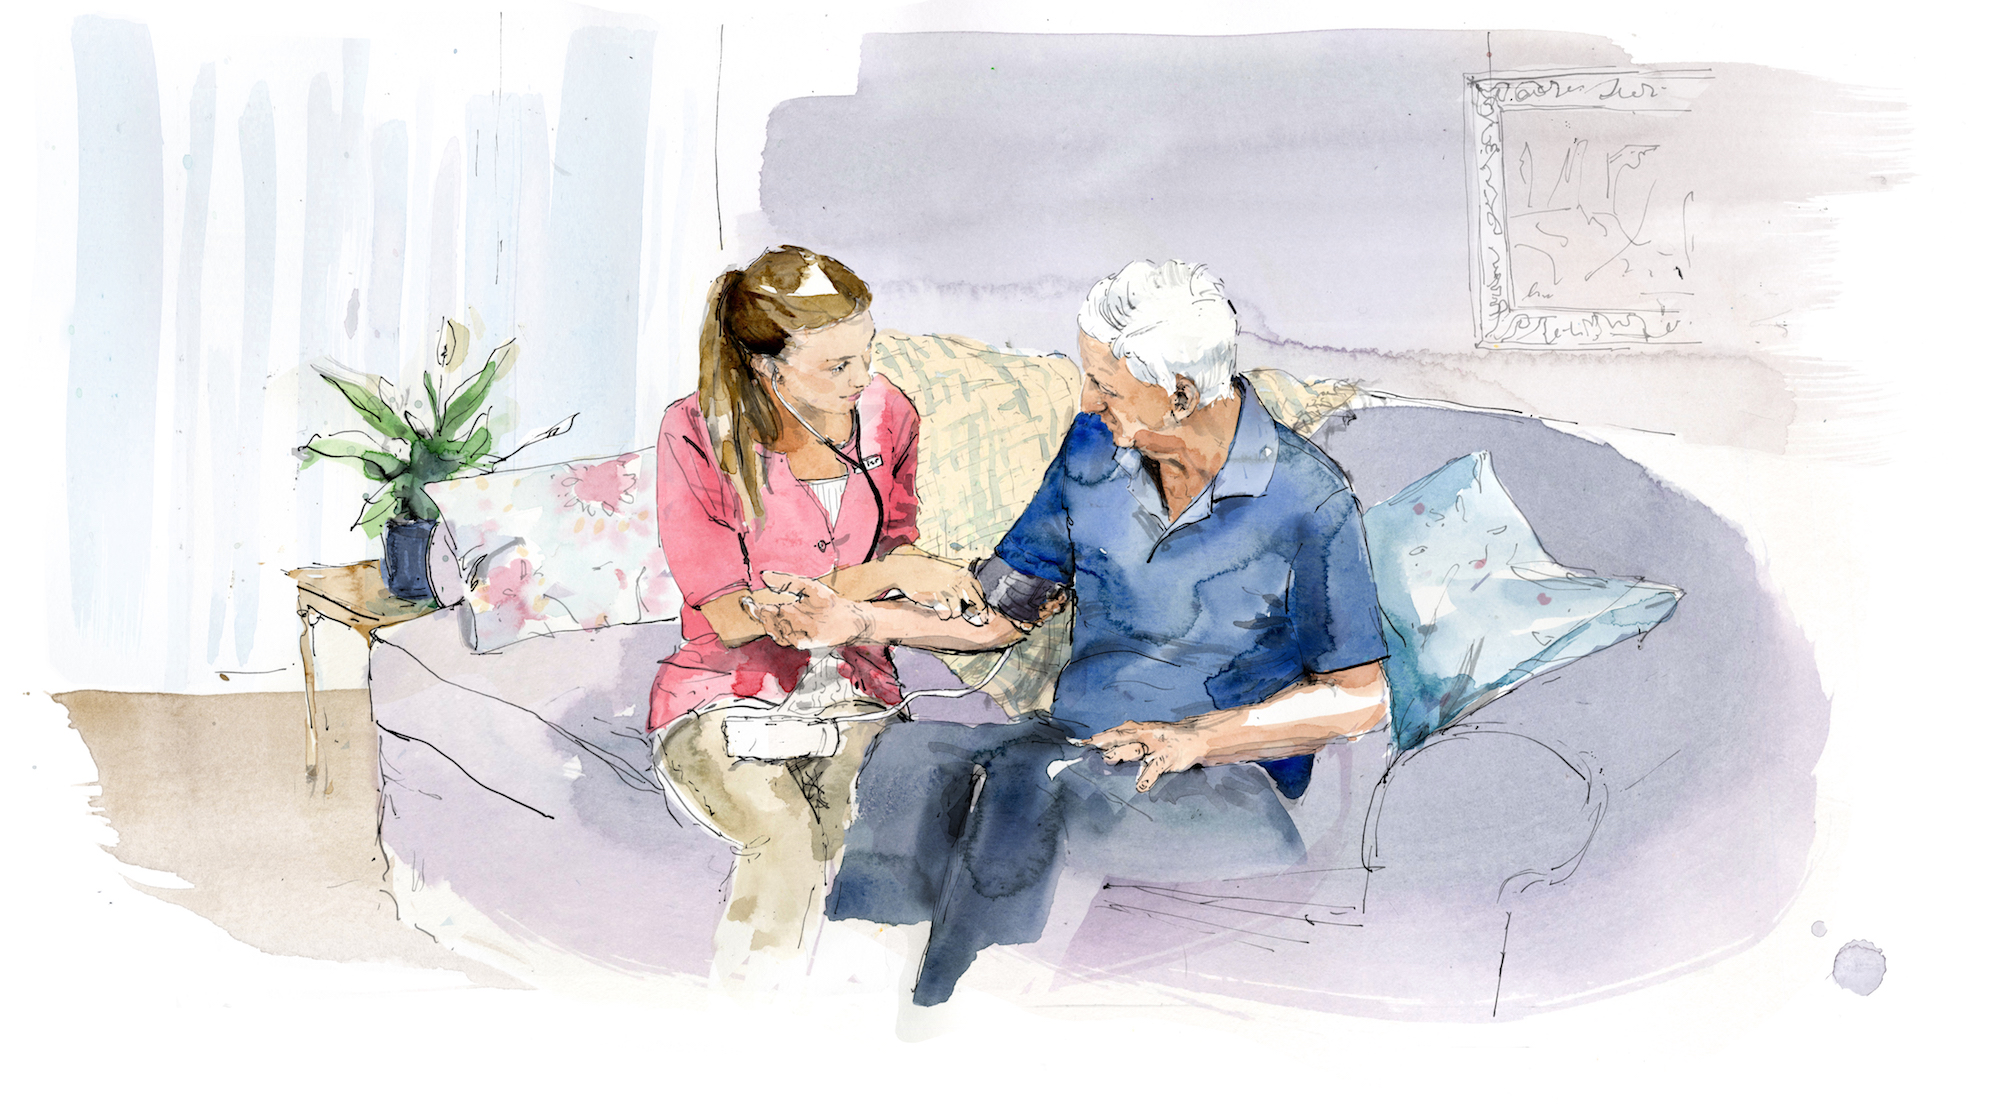 A watercolor of two people sitting on a purple couch, one younger, in a pink blazer and khaki slacks checking the blood pressure of the other person, who is older, wearing blue pants and a blue button-down shirt.